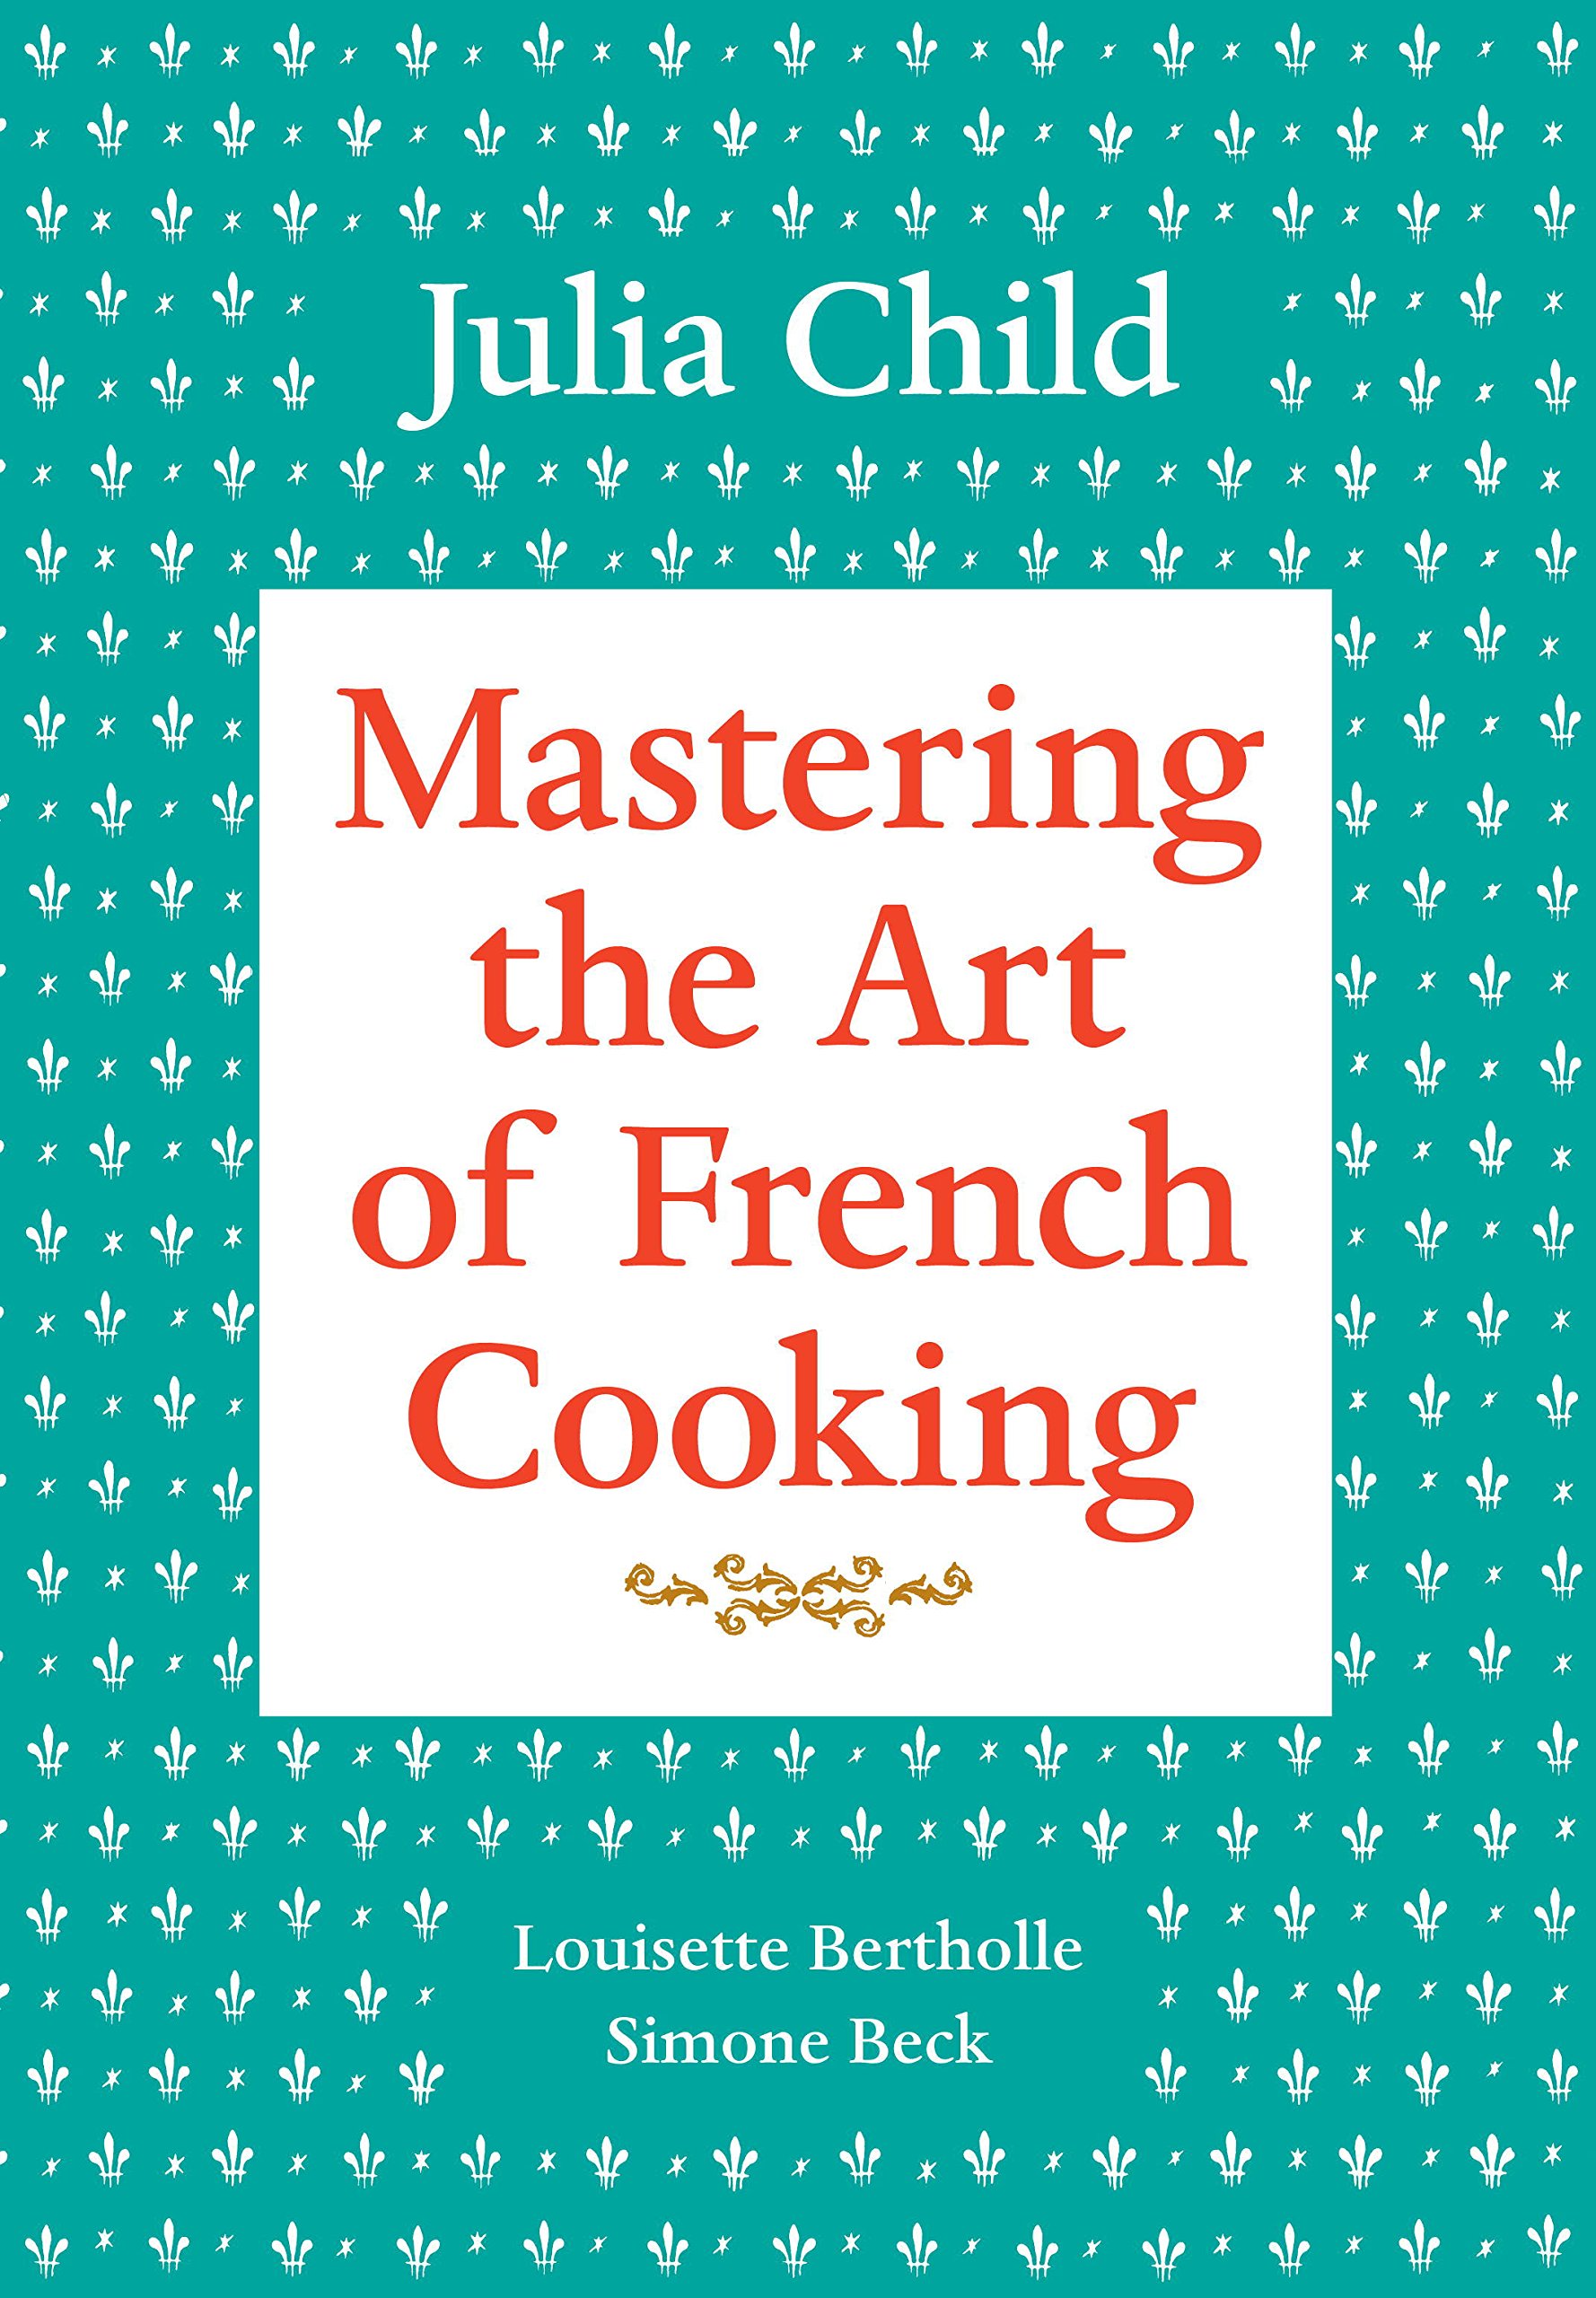 Mastering the Art of French Cooking, Volume 1: A Cookbook (eBook) $2